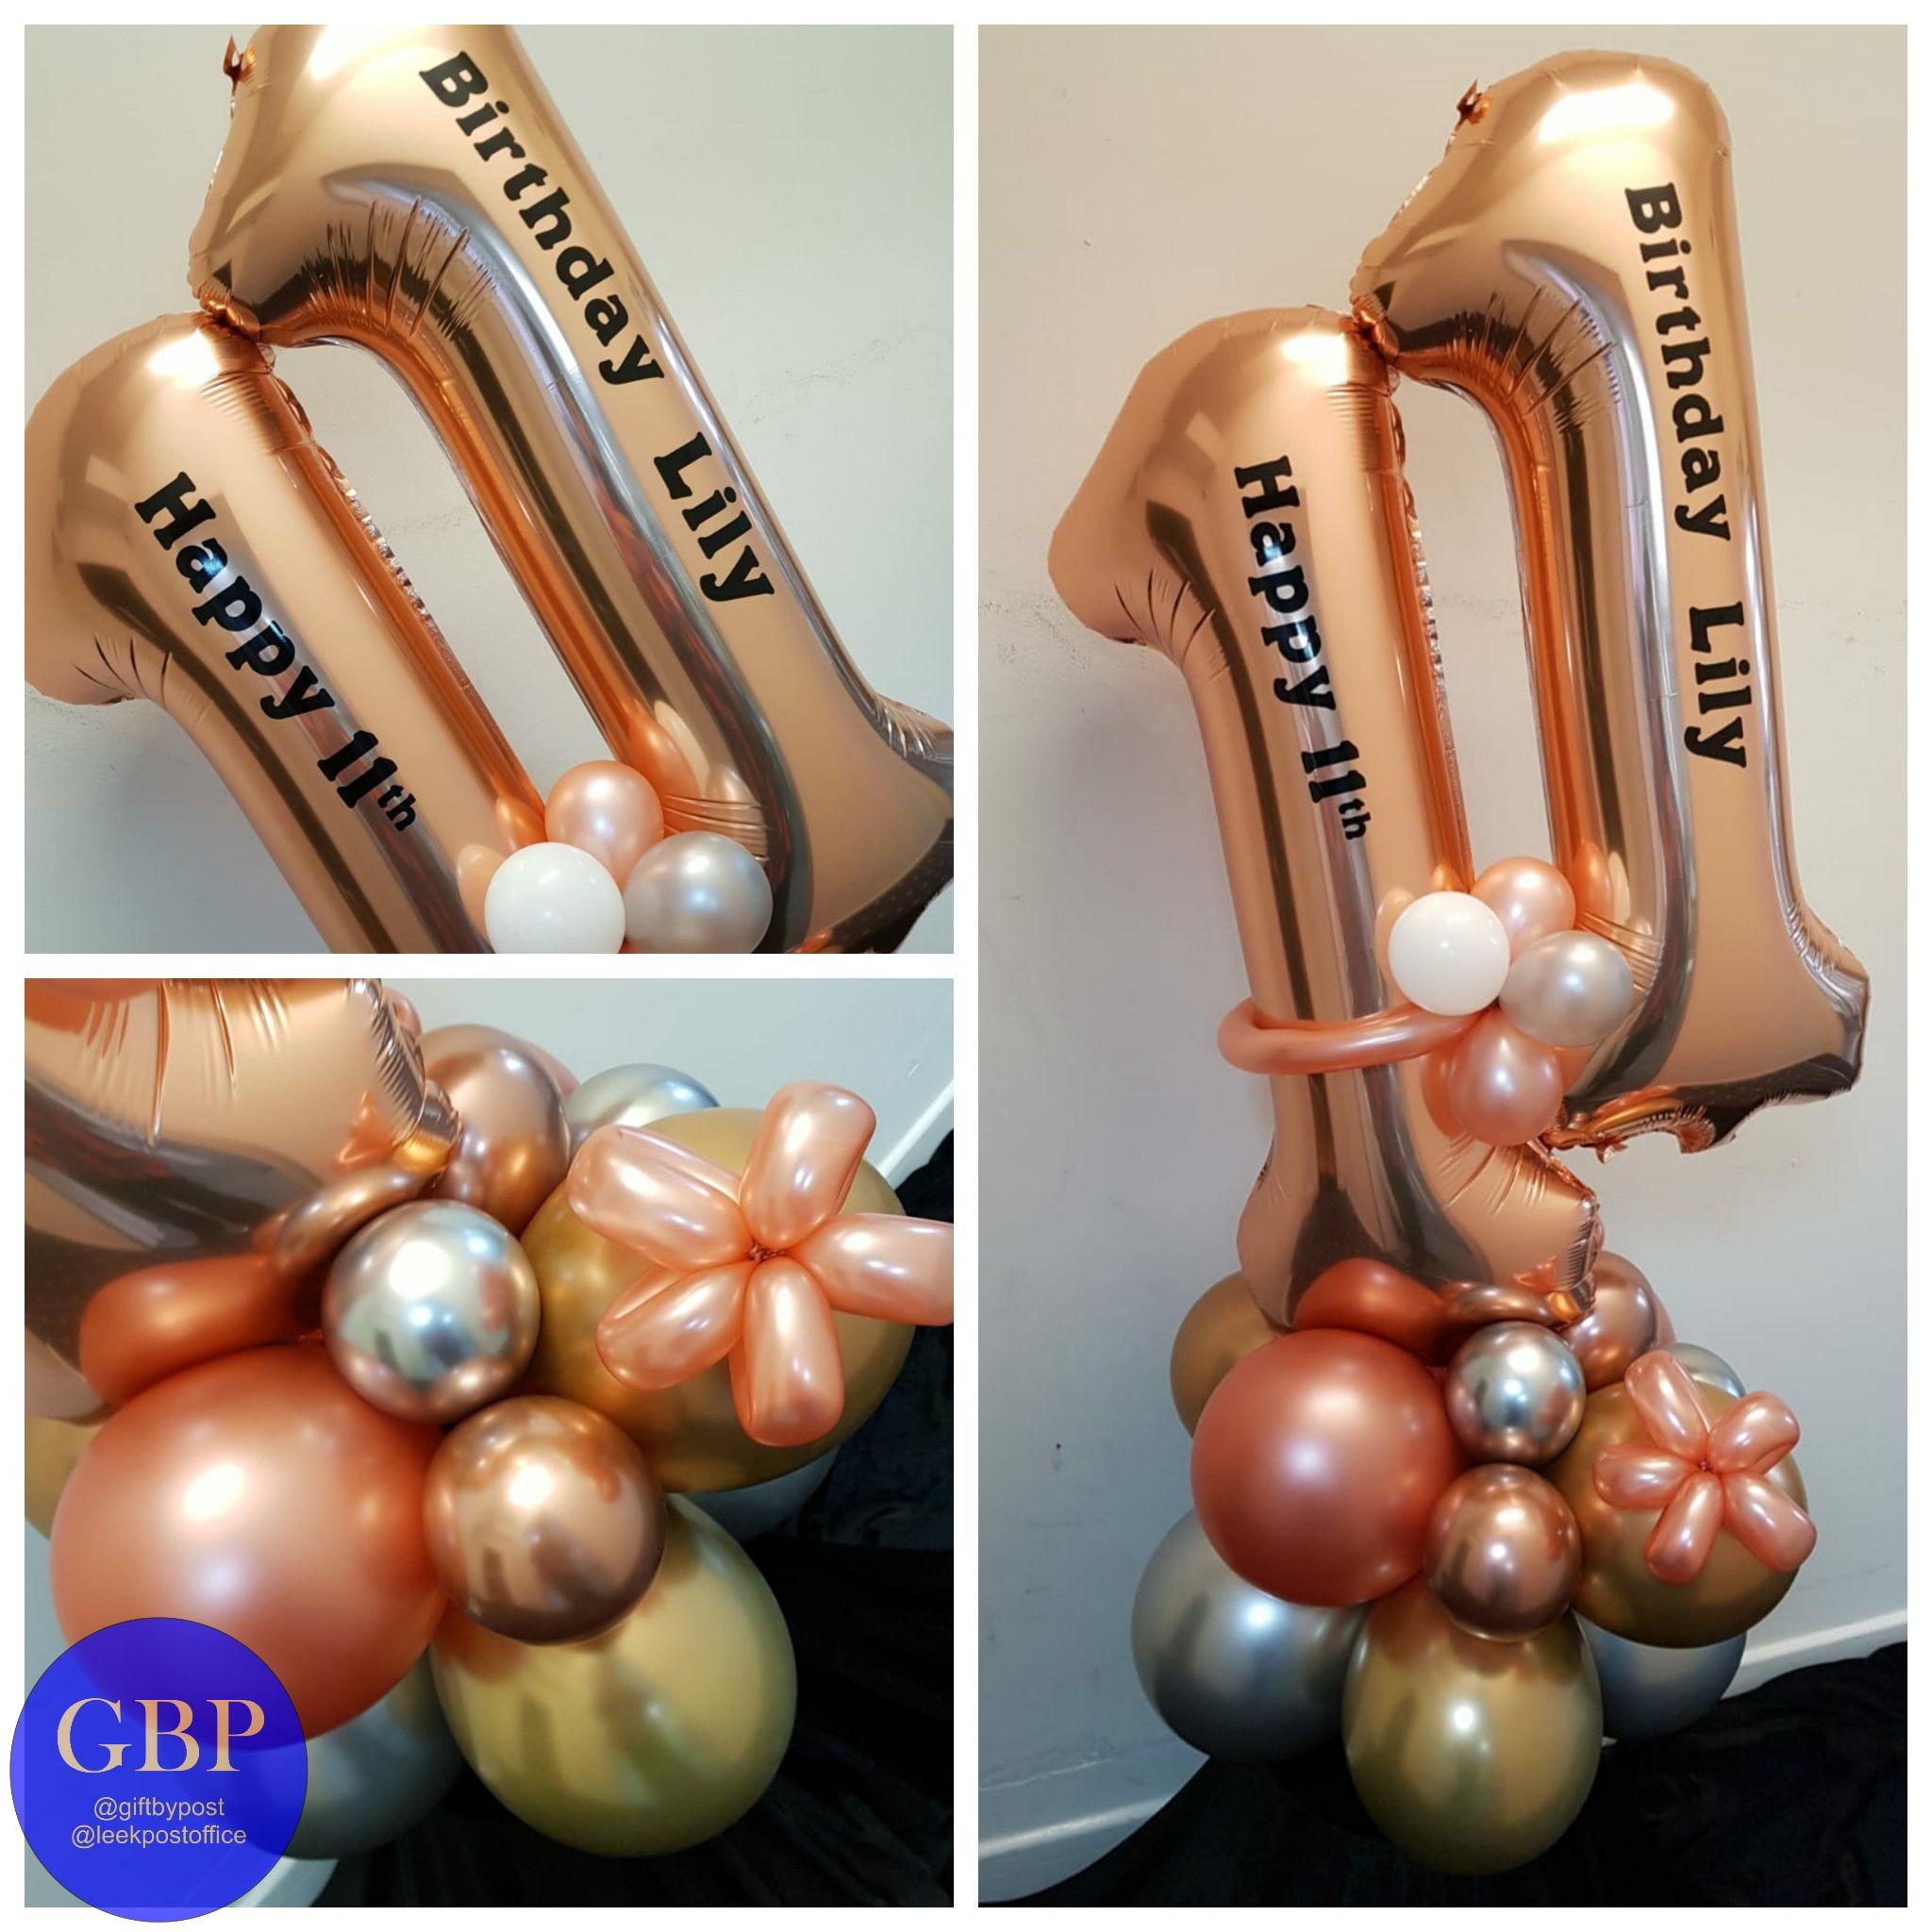 Large Numbers Balloon on a base, Age 11 Rose Gold